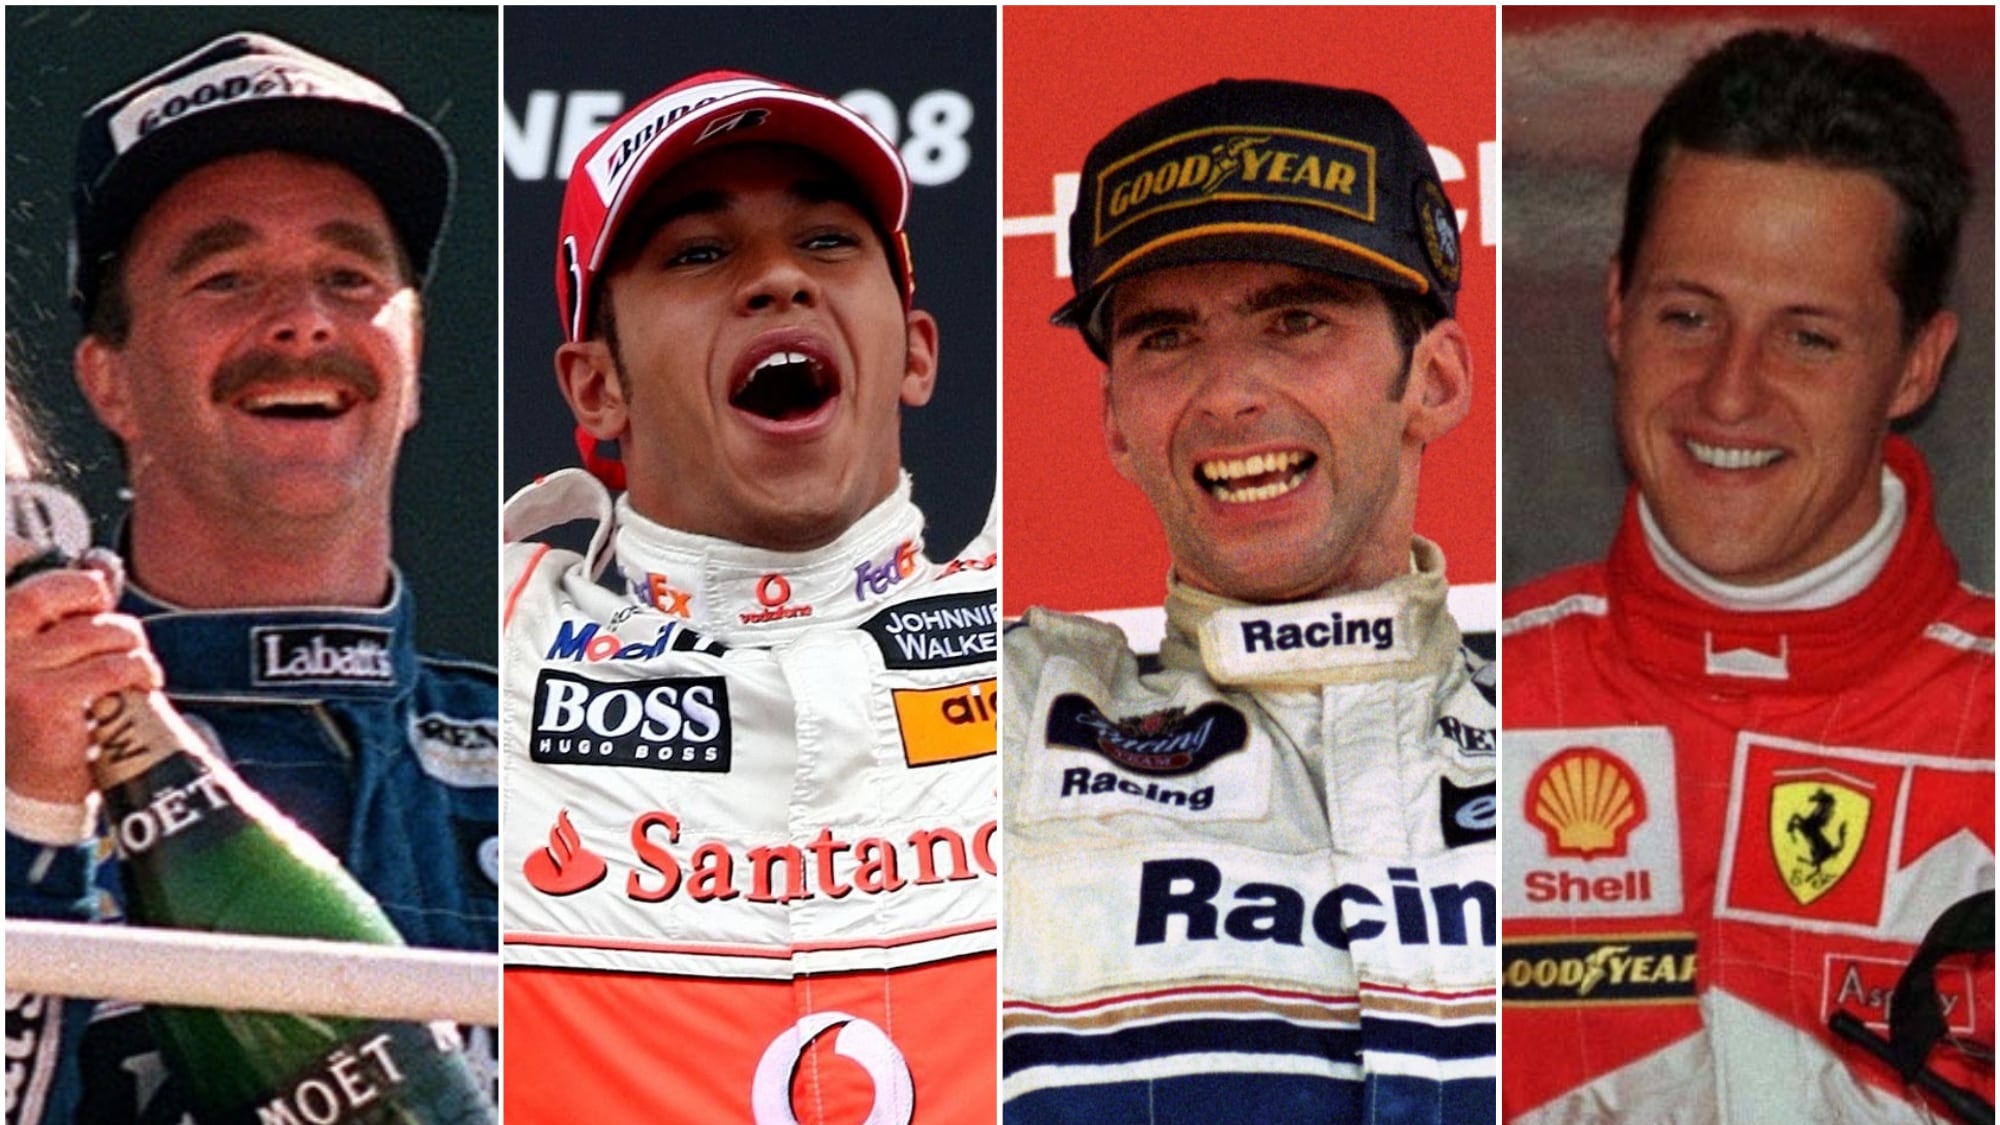 Nigel Mansell (left to right) Lewis Hamilton, Damon Hill and Michael Schumacher have all won the British Grand Prix